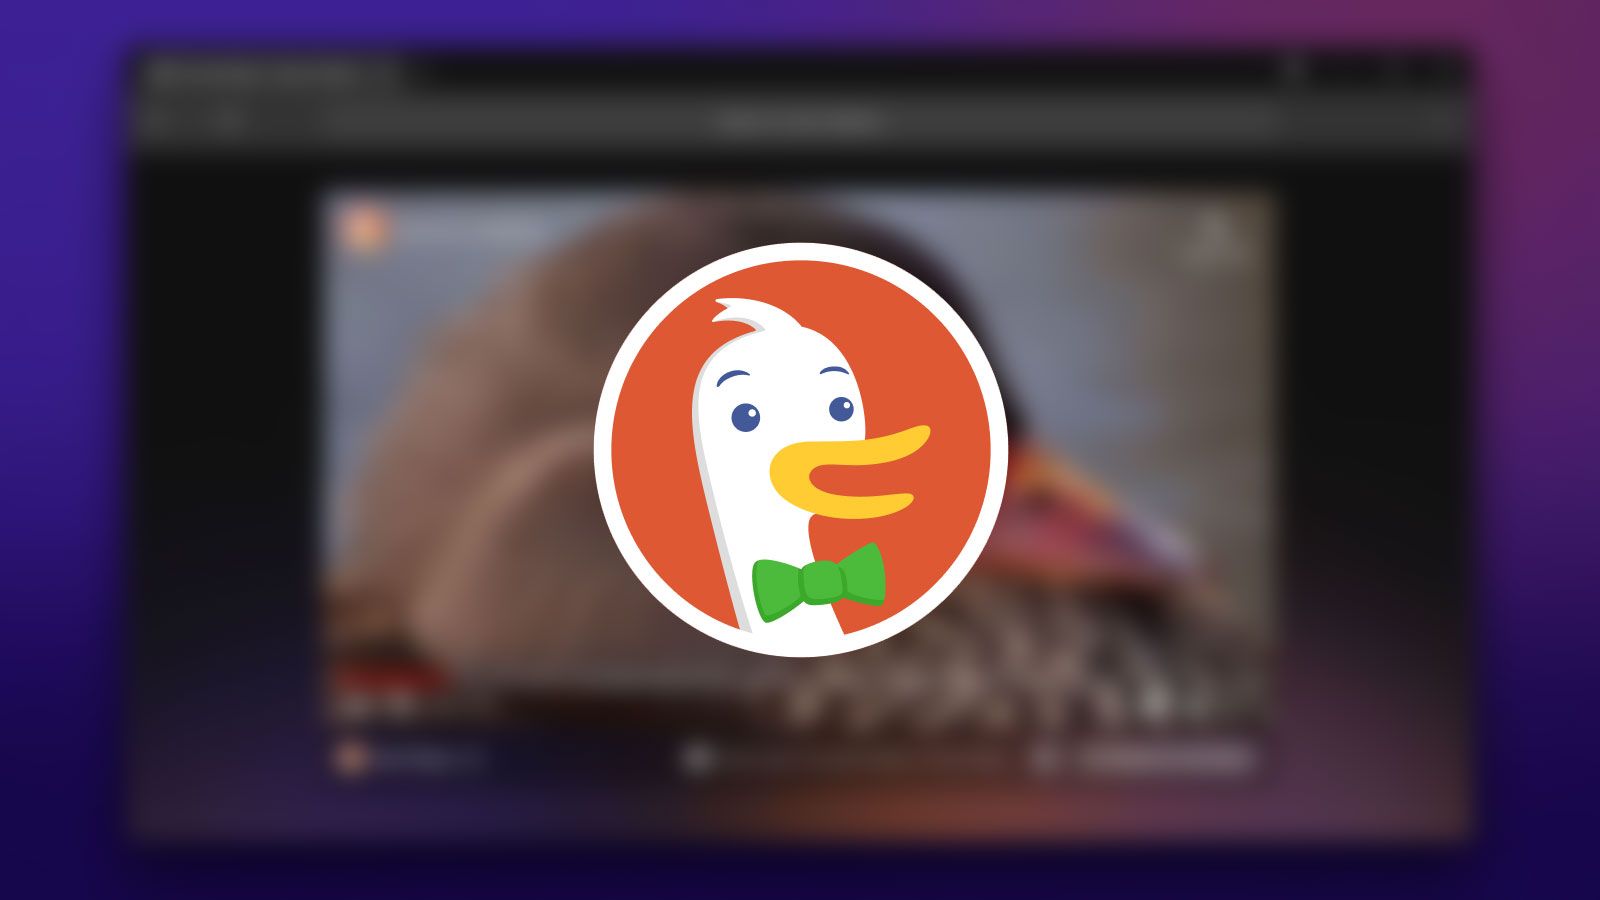 DuckDuckGo now has its own PC browser for keeping what you do online private